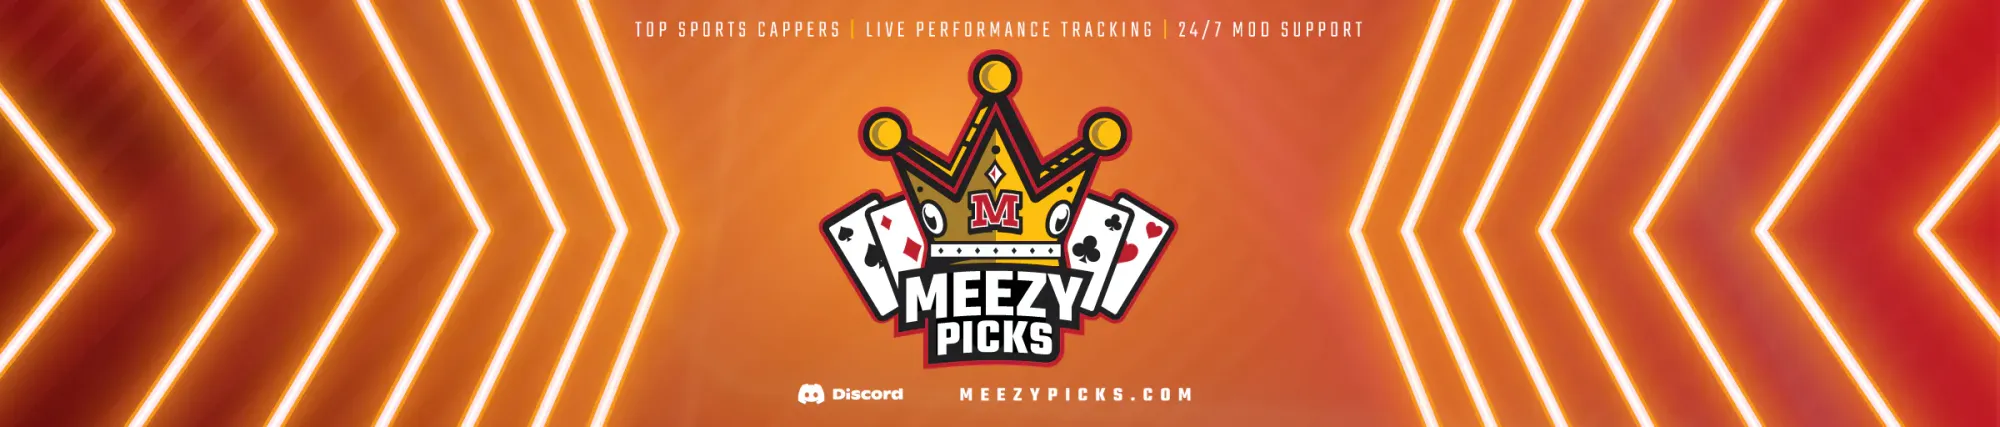 Meezy Picks sports cappers discord at whop